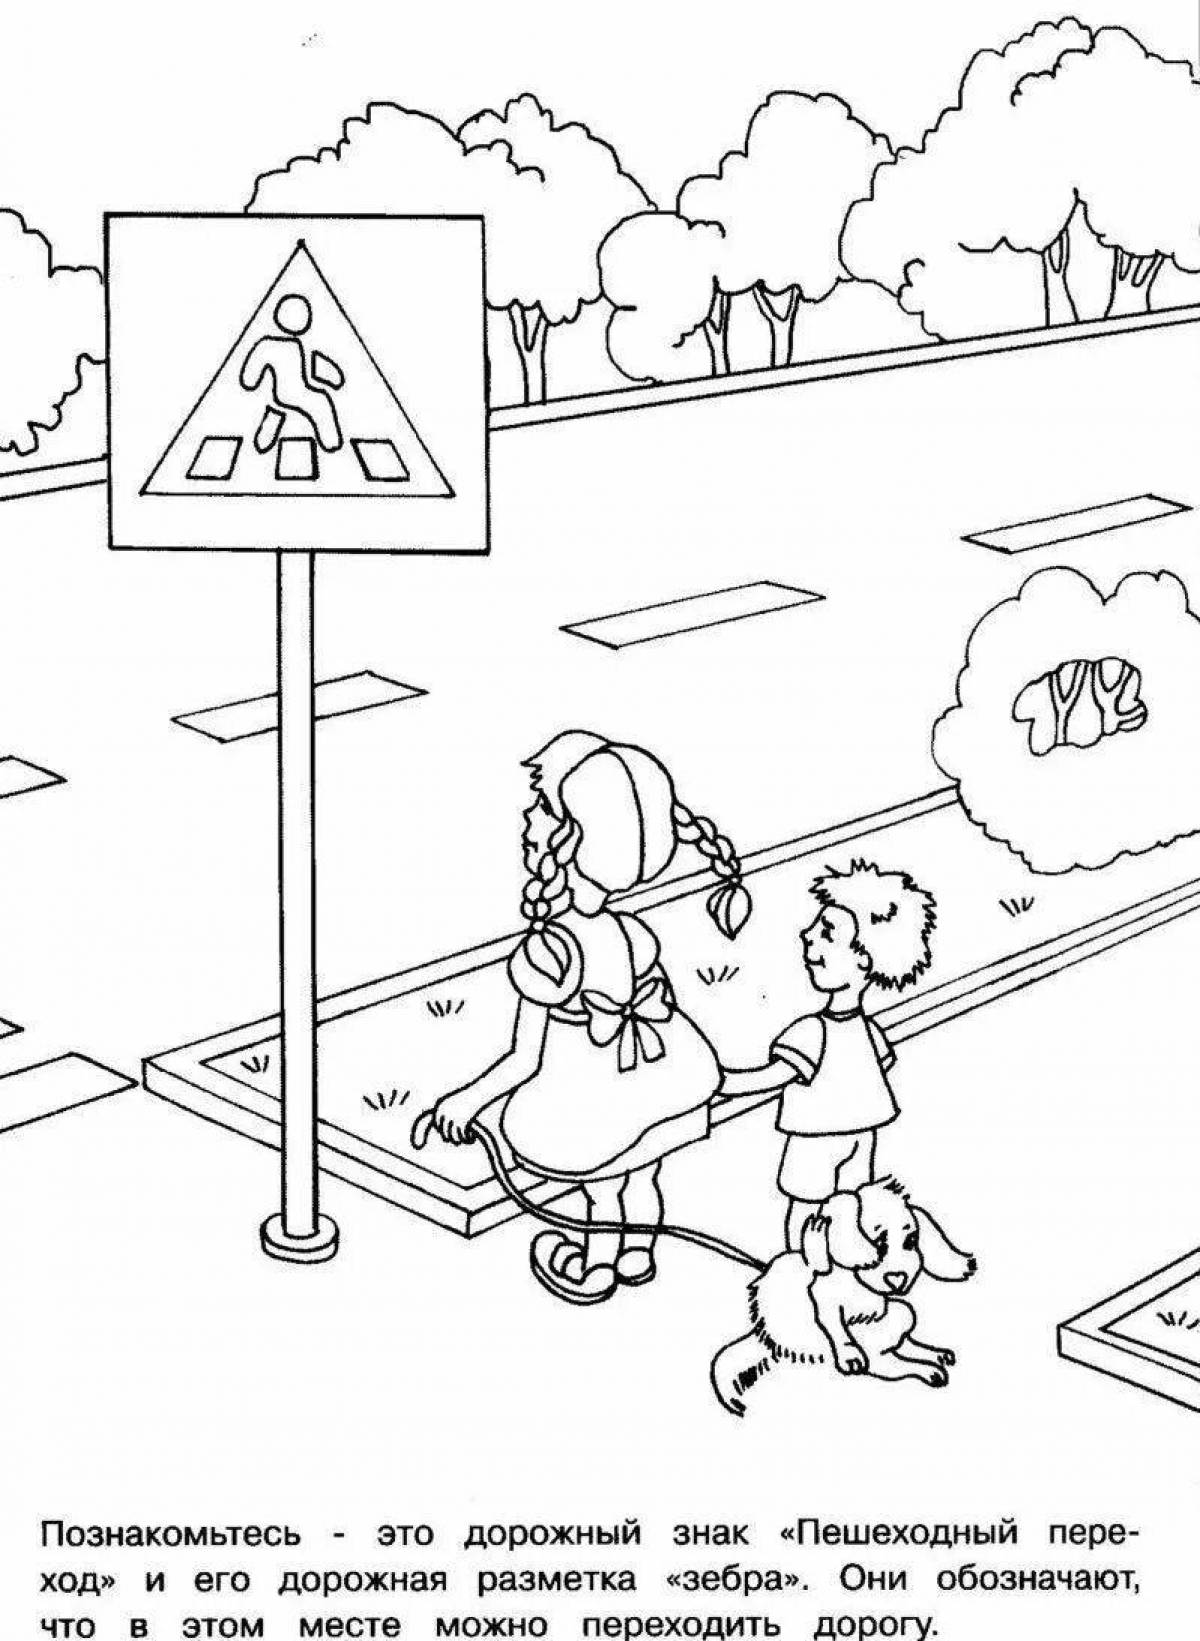 Coloring page traffic safety